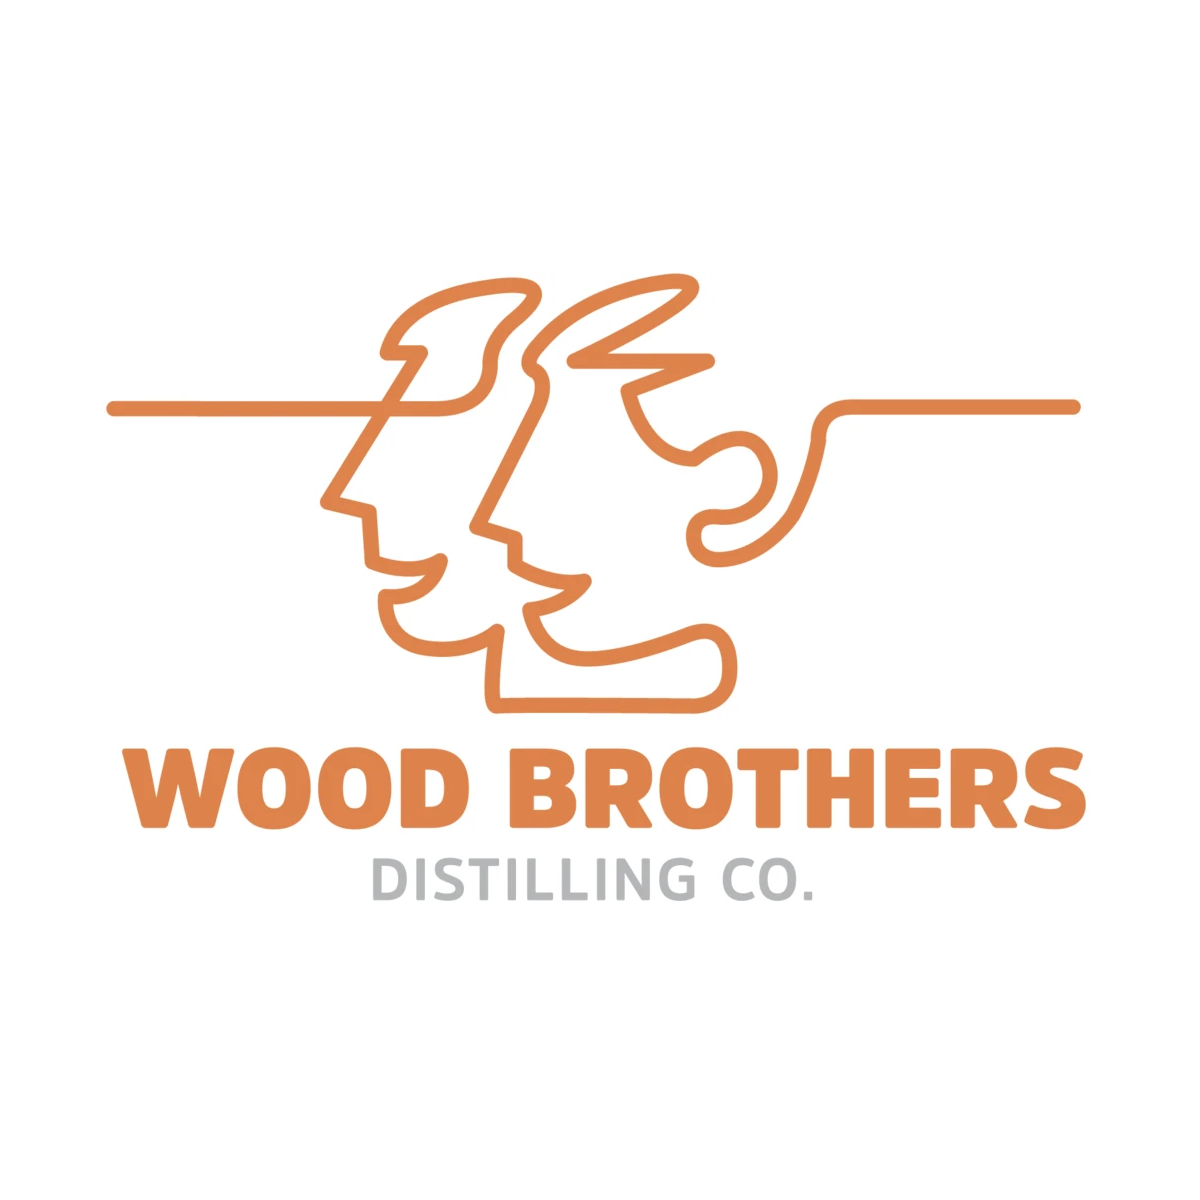 Wood Brothers Distilling Co. brand logo